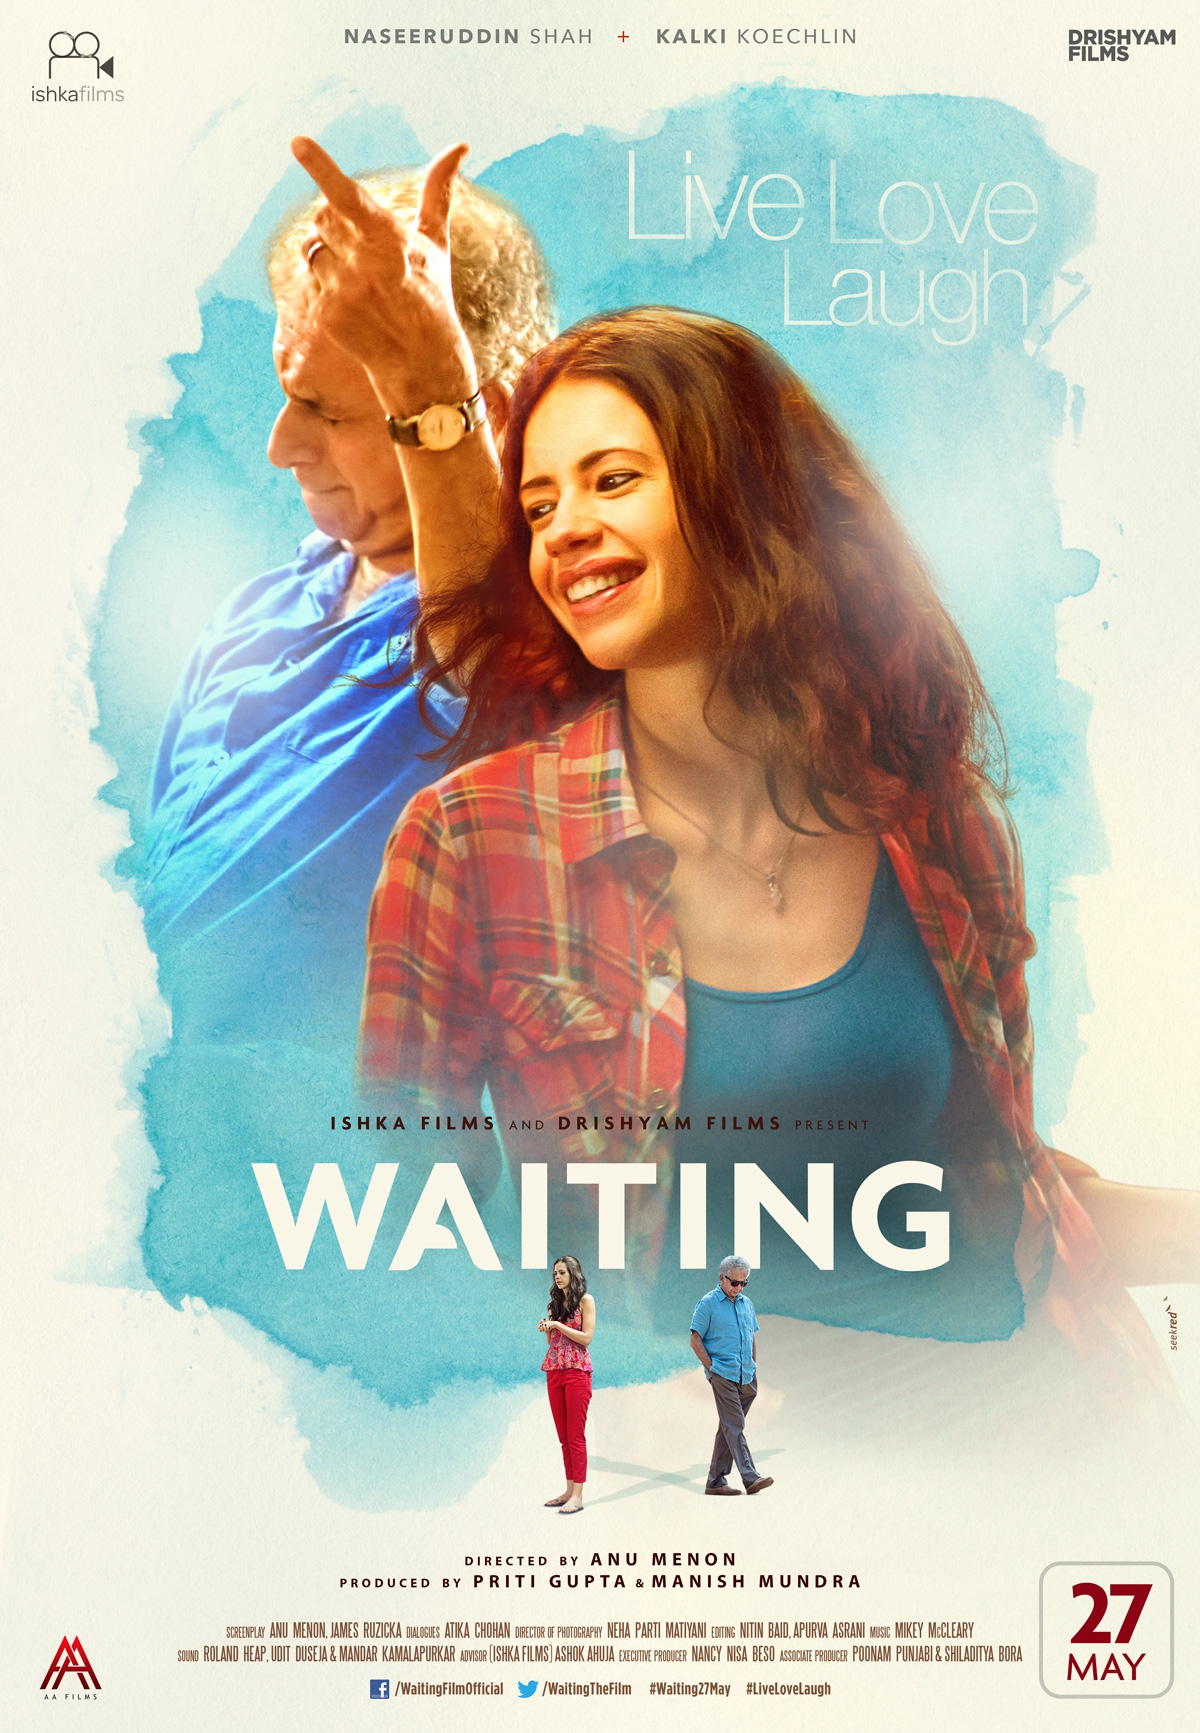  The Waiting (2016)